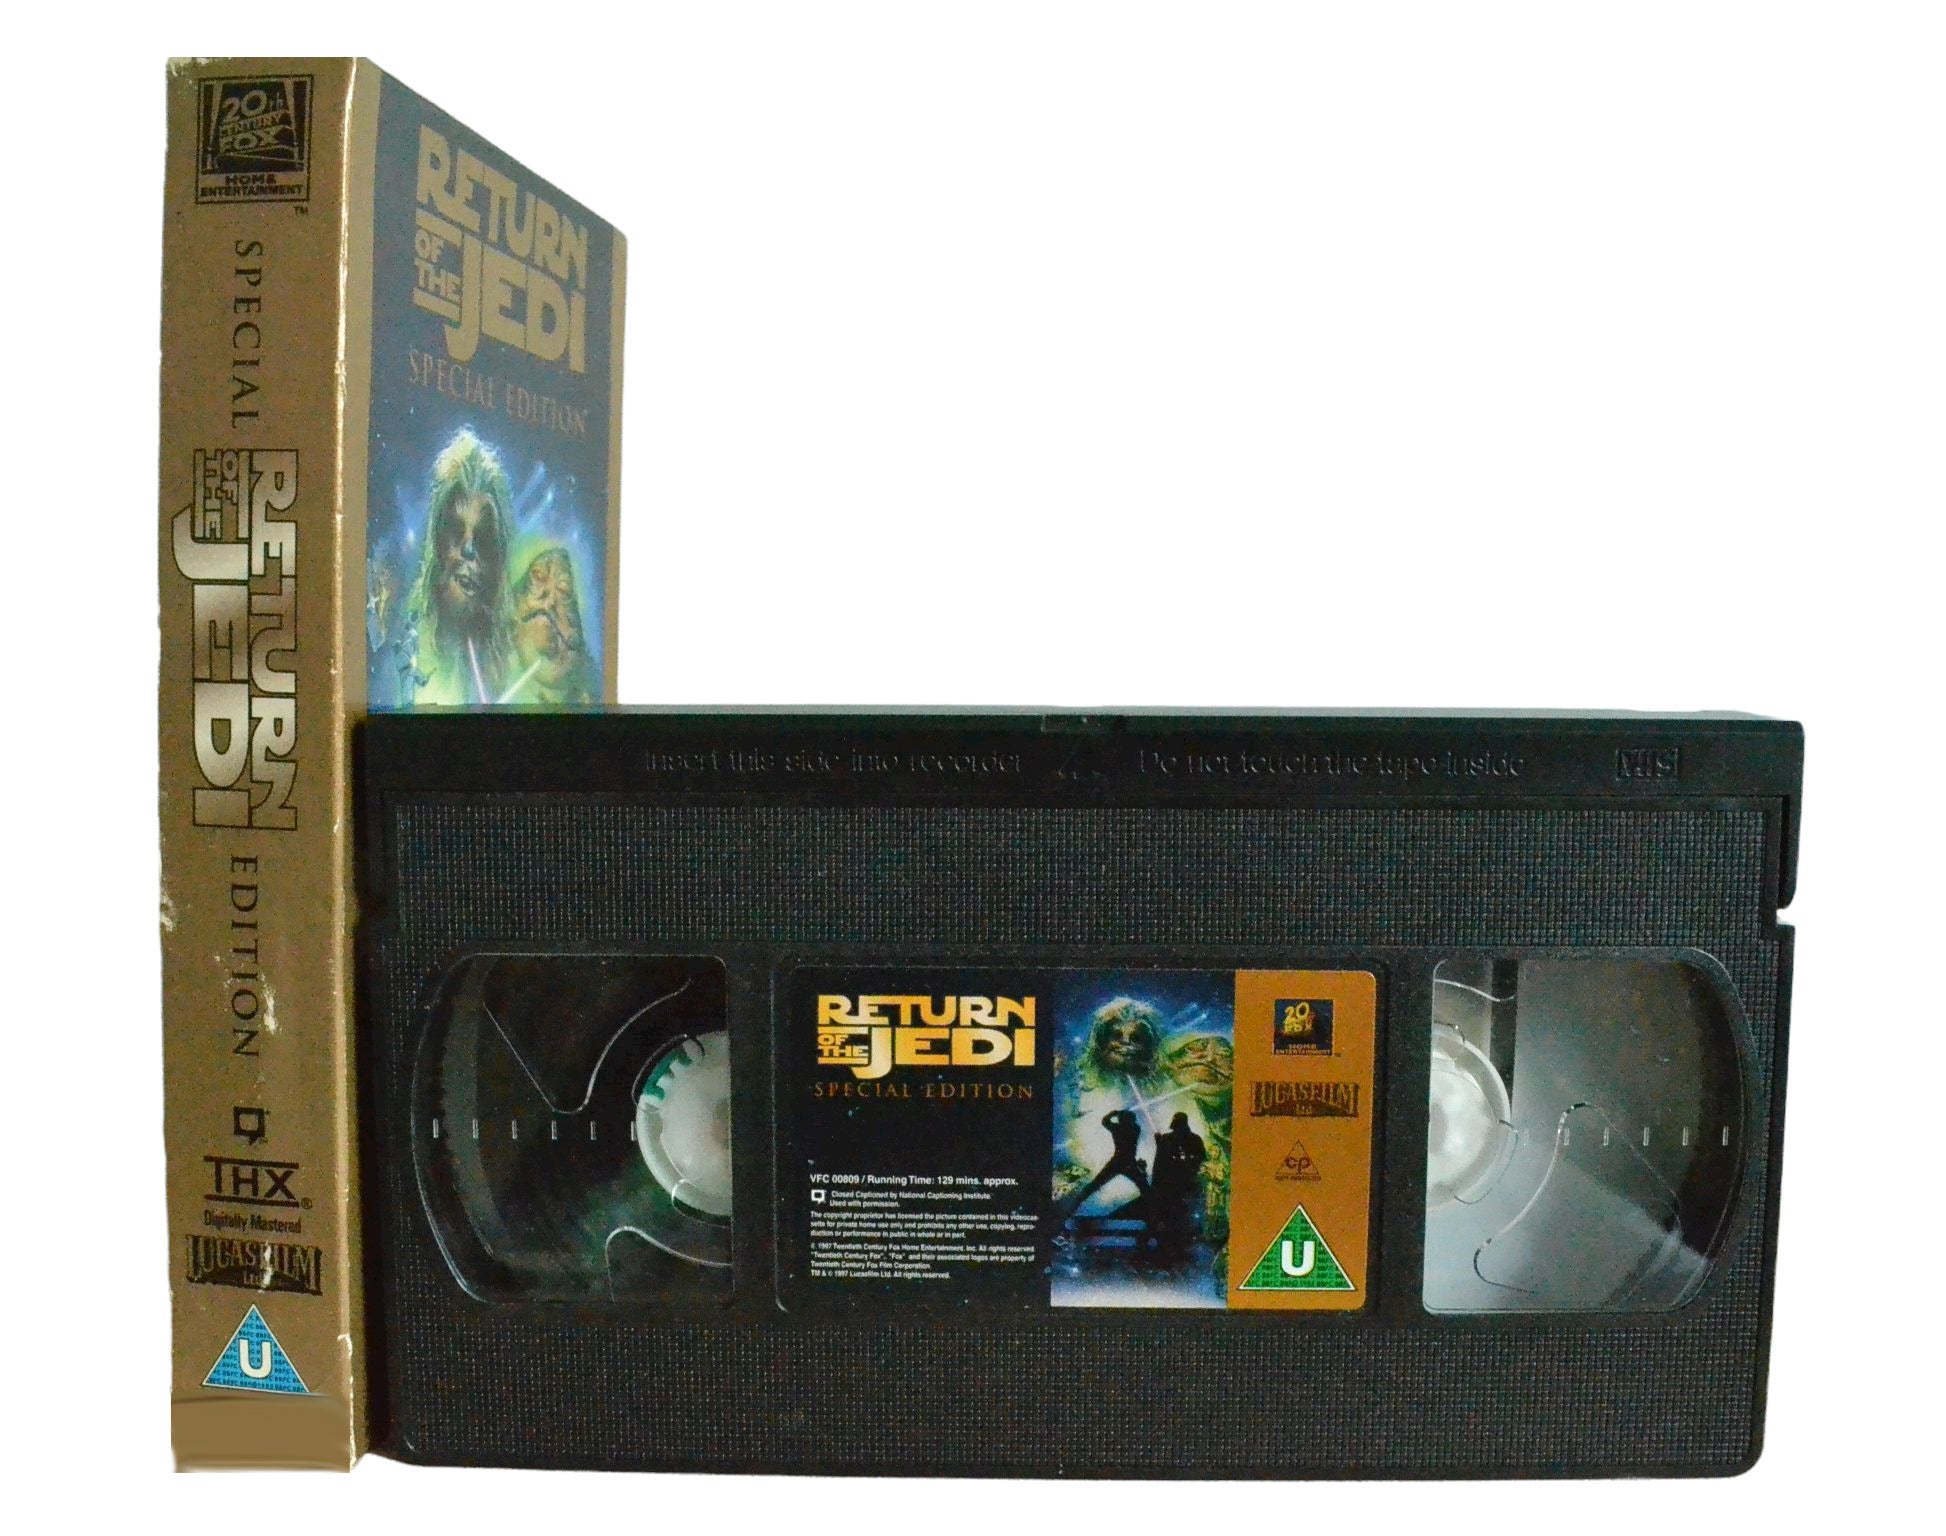 Return Of The Jedi (Special Edition) - Mark Hamill - 20th Century Fox Home Entertainment - Vintage - Pal VHS-